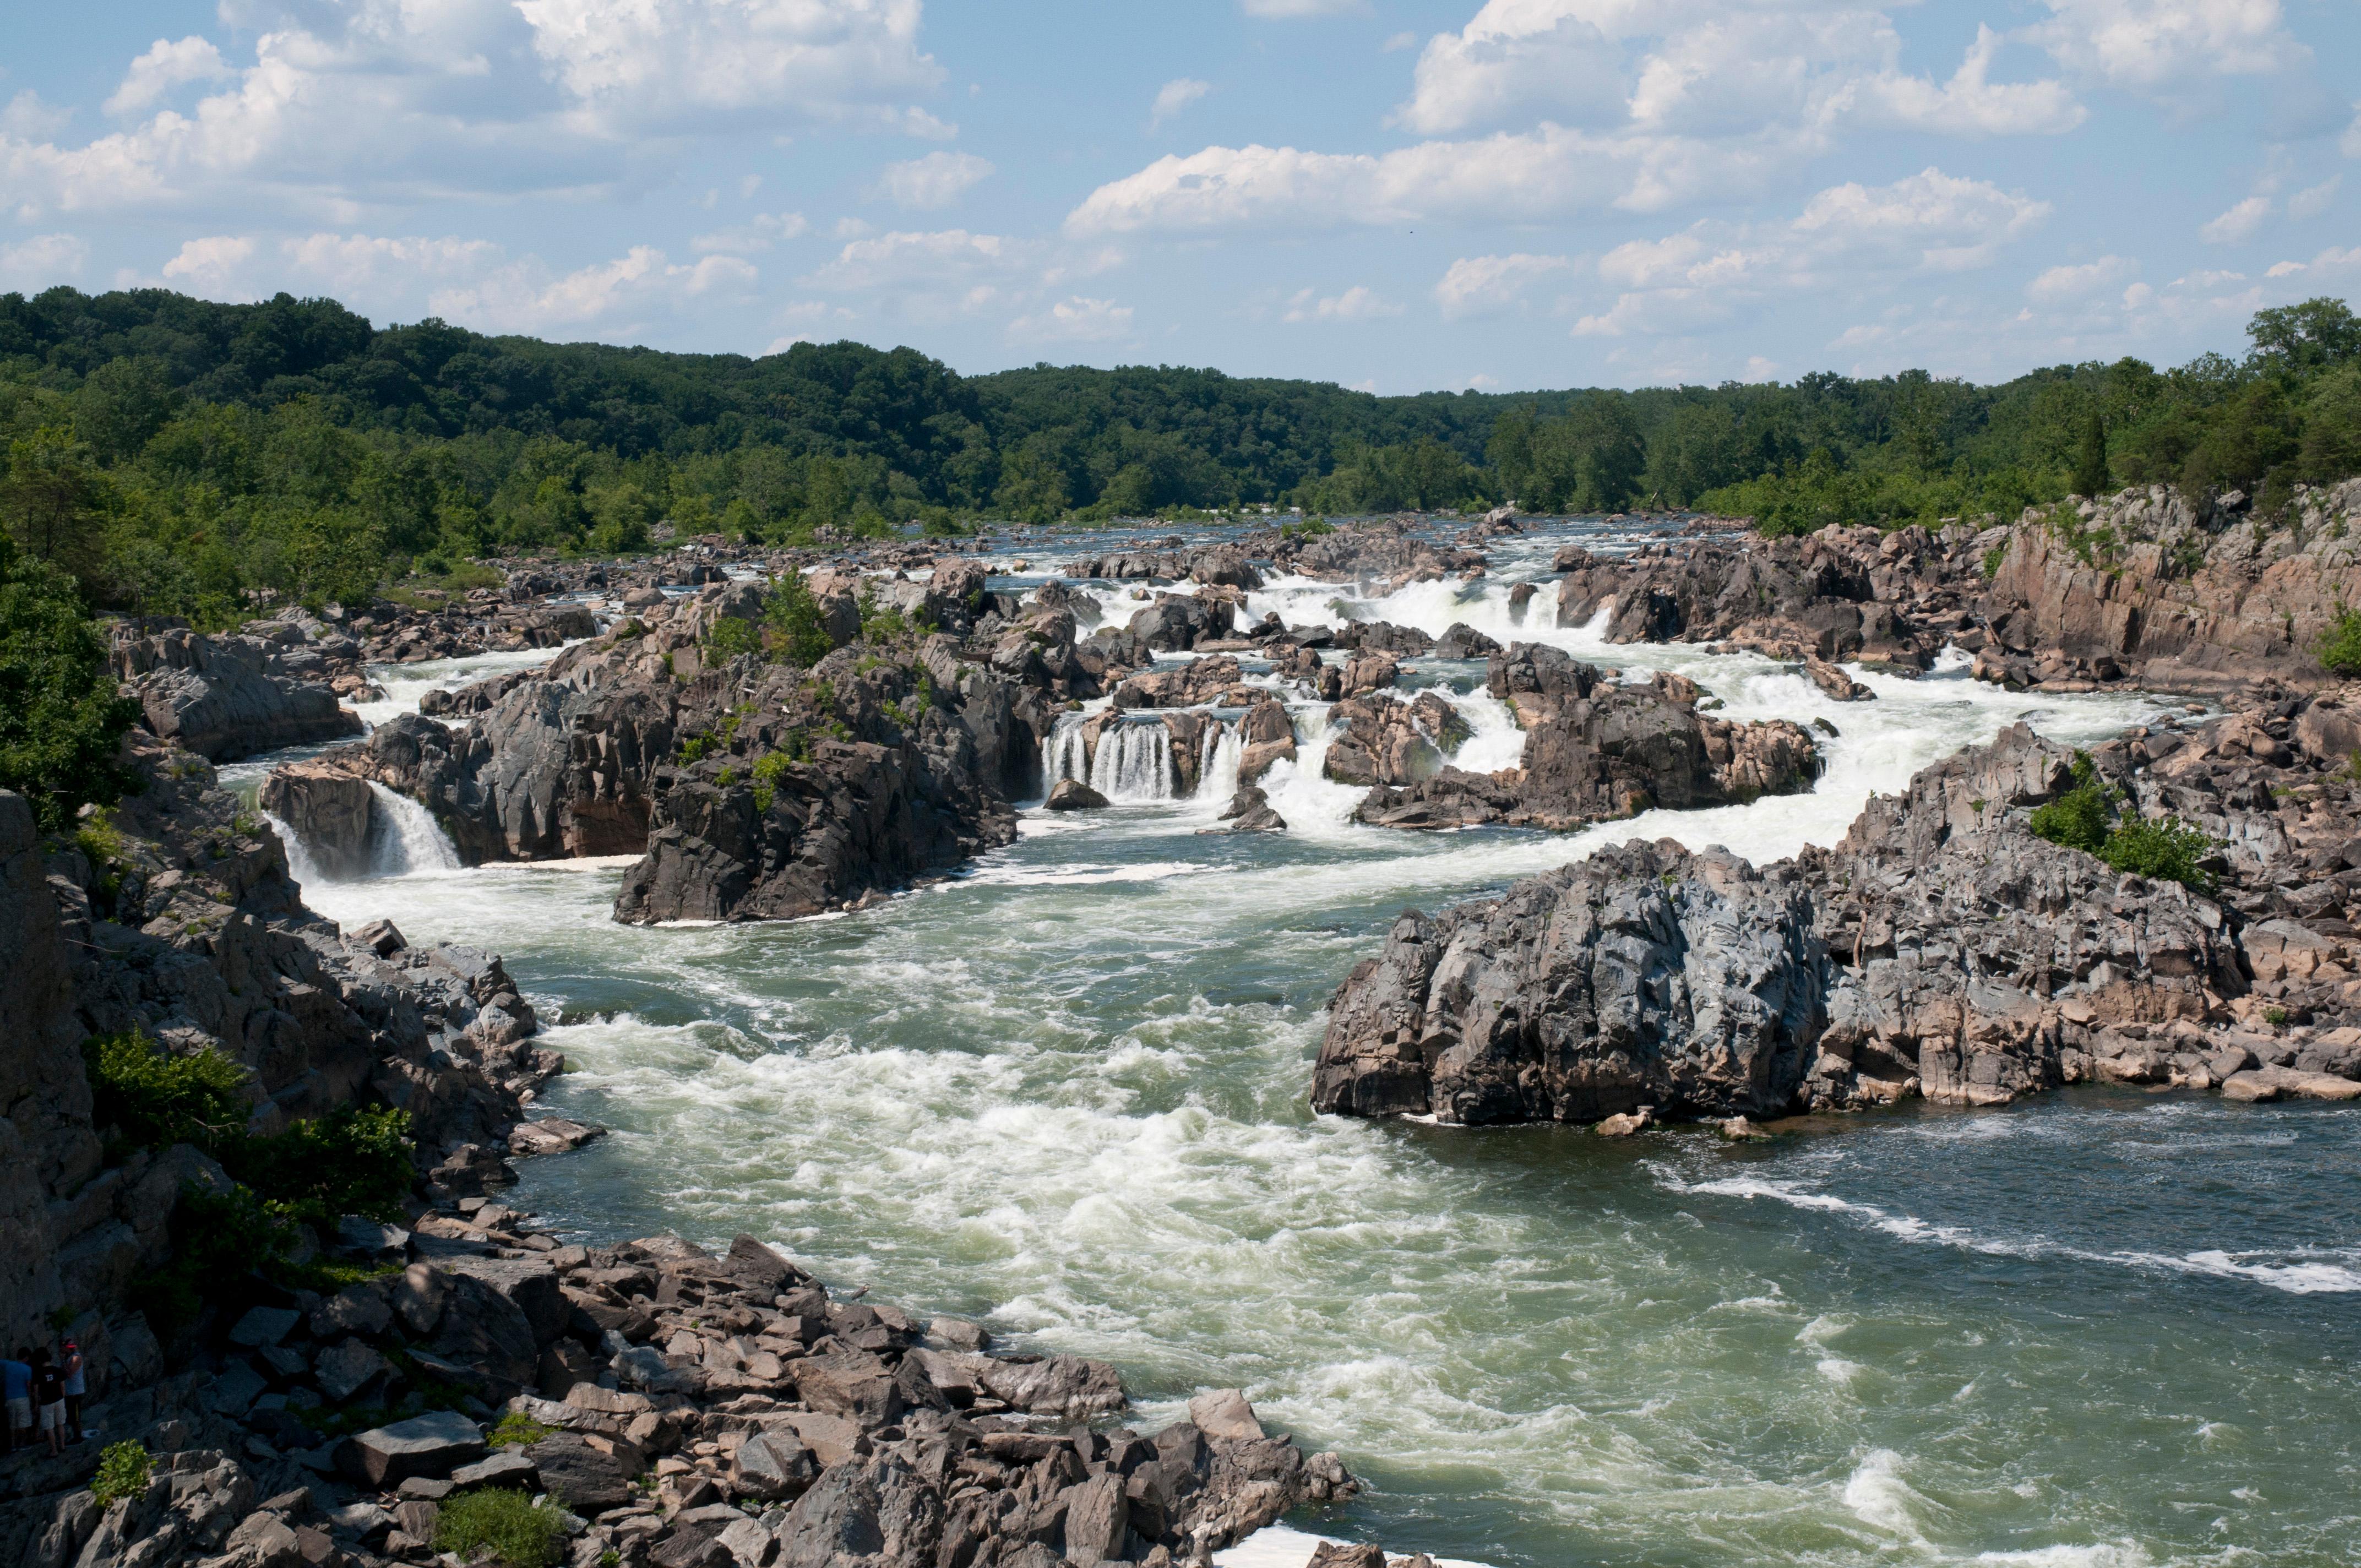 Water pouring down rocks at Great Falls